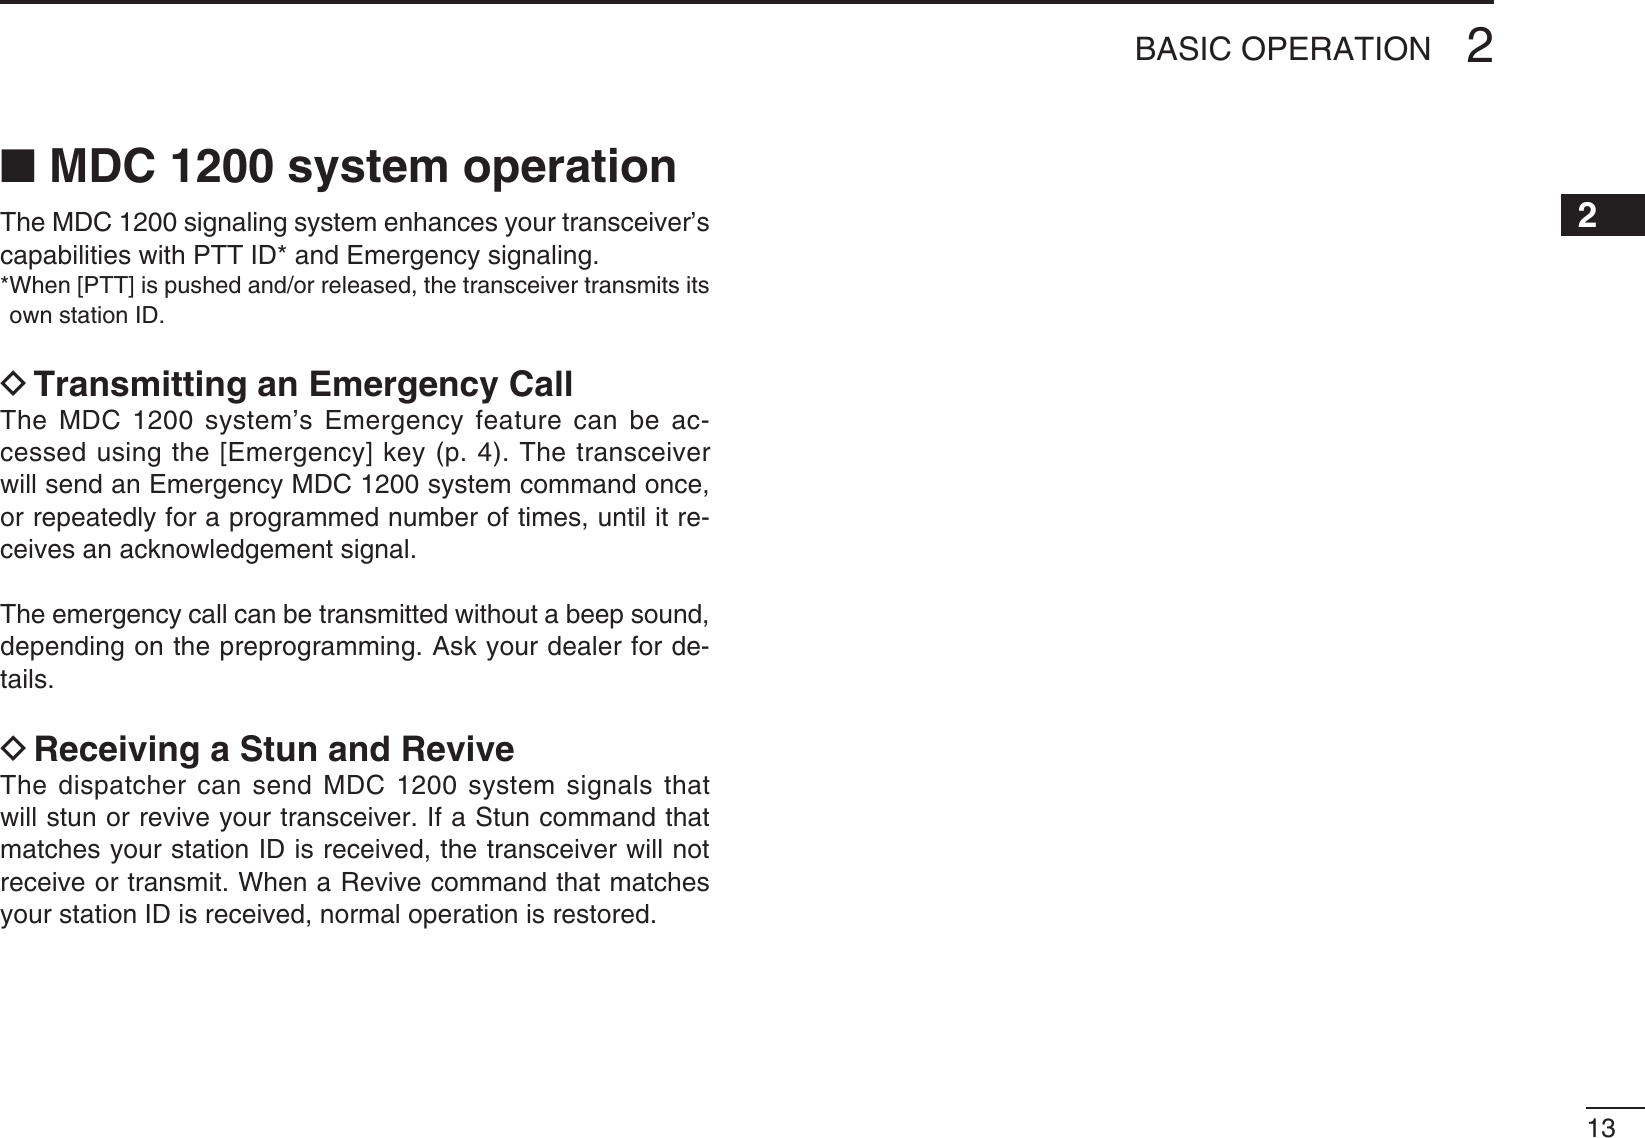 1312345678910111213141516N MDC 1200 system operationThe MDC 1200 signaling system enhances your transceiver’s capabilities with PTT ID* and Emergency signaling.7HEN;044=ISPUSHEDANDORRELEASEDTHETRANSCEIVERTRANSMITSITSown station ID.D Transmitting an Emergency Call The MDC 1200 system’s Emergency feature can be ac-cessed using the [Emergency] key (p. 4). The transceiver will send an Emergency MDC 1200 system command once, or repeatedly for a programmed number of times, until it re-ceives an acknowledgement signal.The emergency call can be transmitted without a beep sound, depending on the preprogramming. Ask your dealer for de-tails.D Receiving a Stun and ReviveThe dispatcher can send MDC 1200 system signals that will stun or revive your transceiver. If a Stun command that matches your station ID is received, the transceiver will not receive or transmit. When a Revive command that matches your station ID is received, normal operation is restored.2BASIC OPERATION